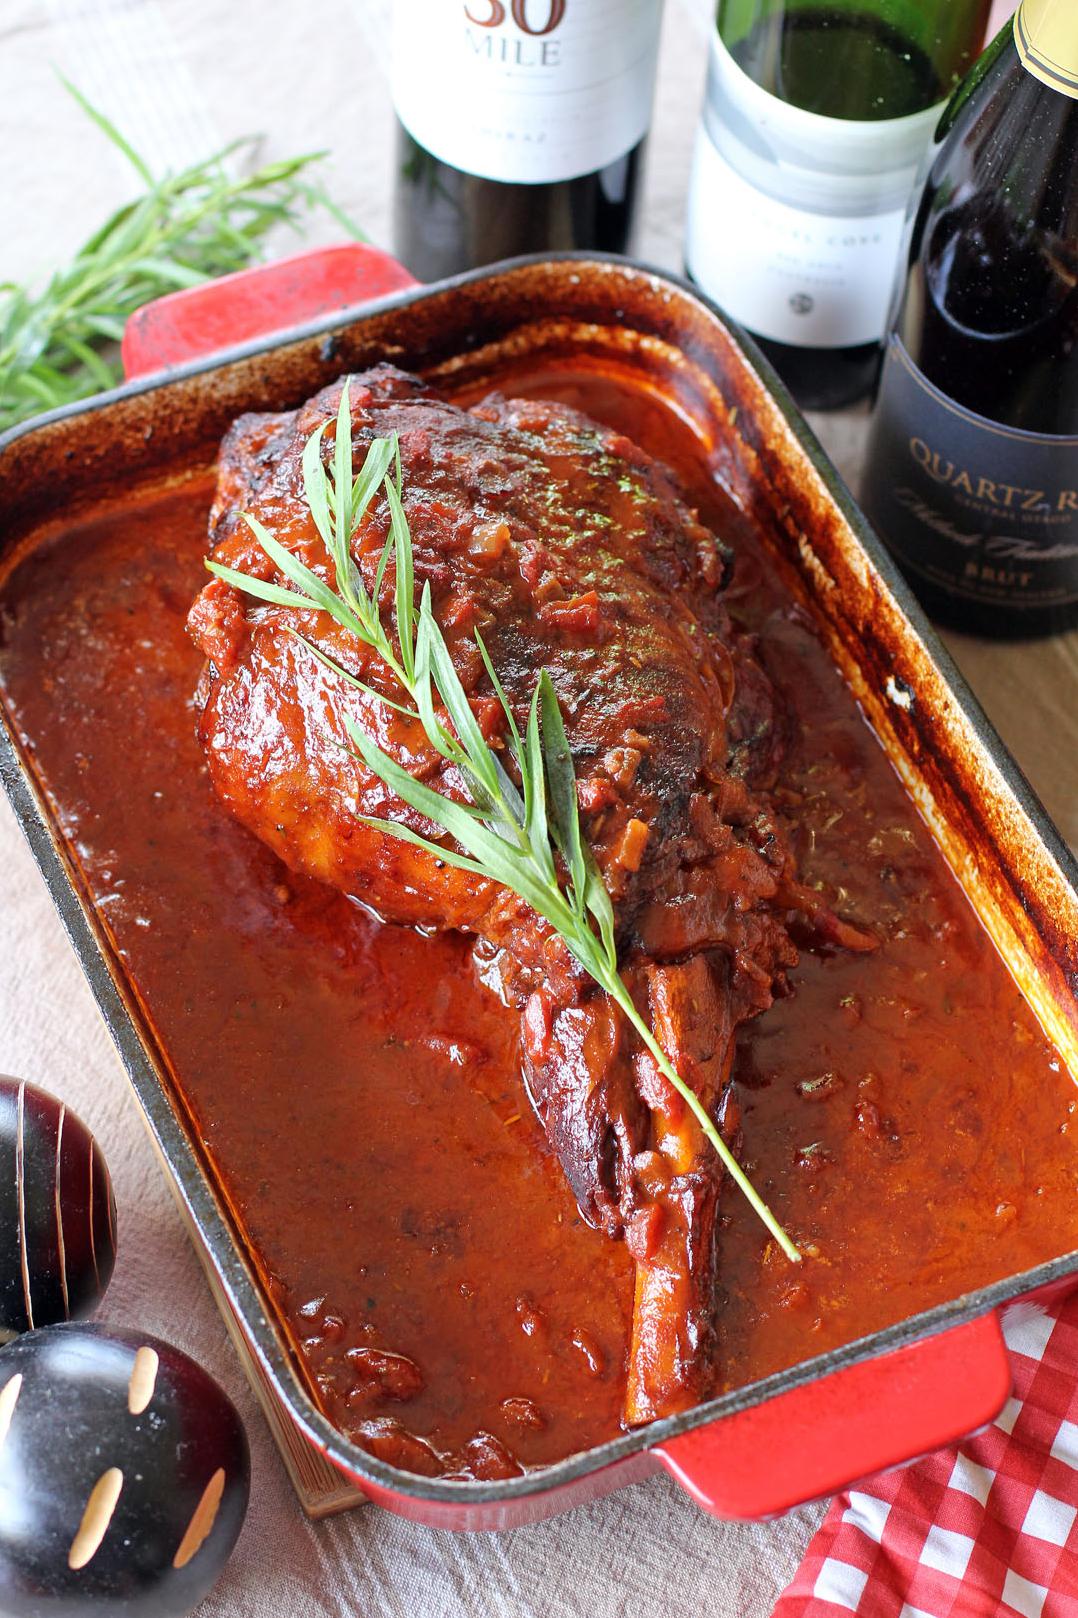  The long and slow cooking process results in a deeply flavorful sauce that you won't be able